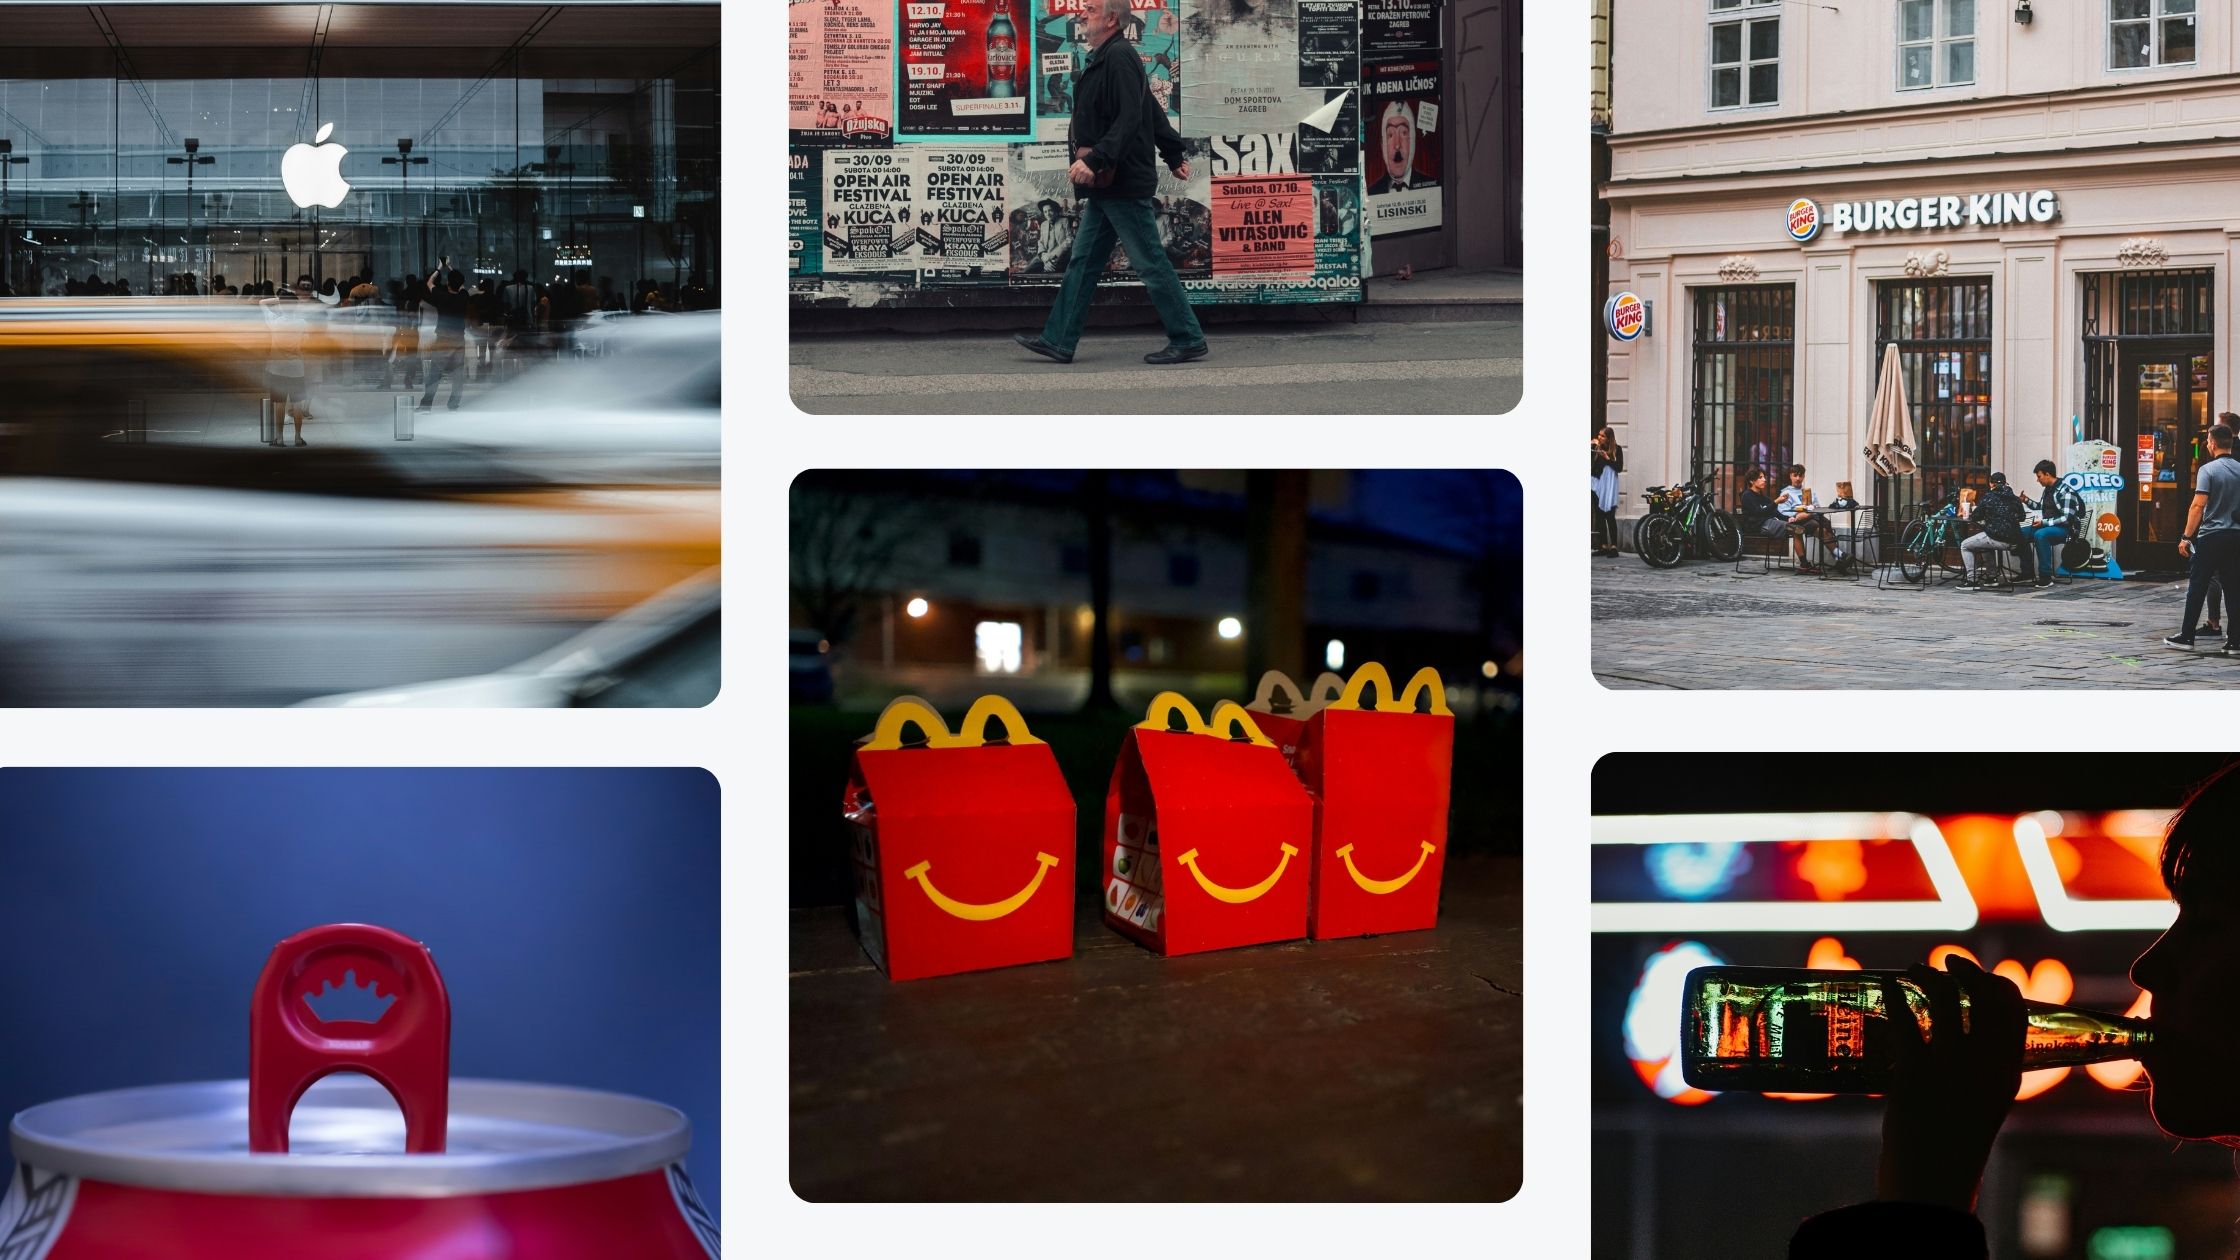 A collage of six images featuring recognizable brands and urban scenes. The top left image shows an Apple store with a large illuminated logo, blurred by the motion of passing cars. The top center image captures a person walking past a wall covered in posters and advertisements. The top right image features a Burger King restaurant with people dining outside. The bottom left image shows the red tab of a soda can, prominently displaying the logo. The bottom center image has three McDonald's Happy Meal boxes with smiley faces, placed outdoors at night. The bottom right image depicts a person silhouetted against bright lights, drinking from a green bottle.